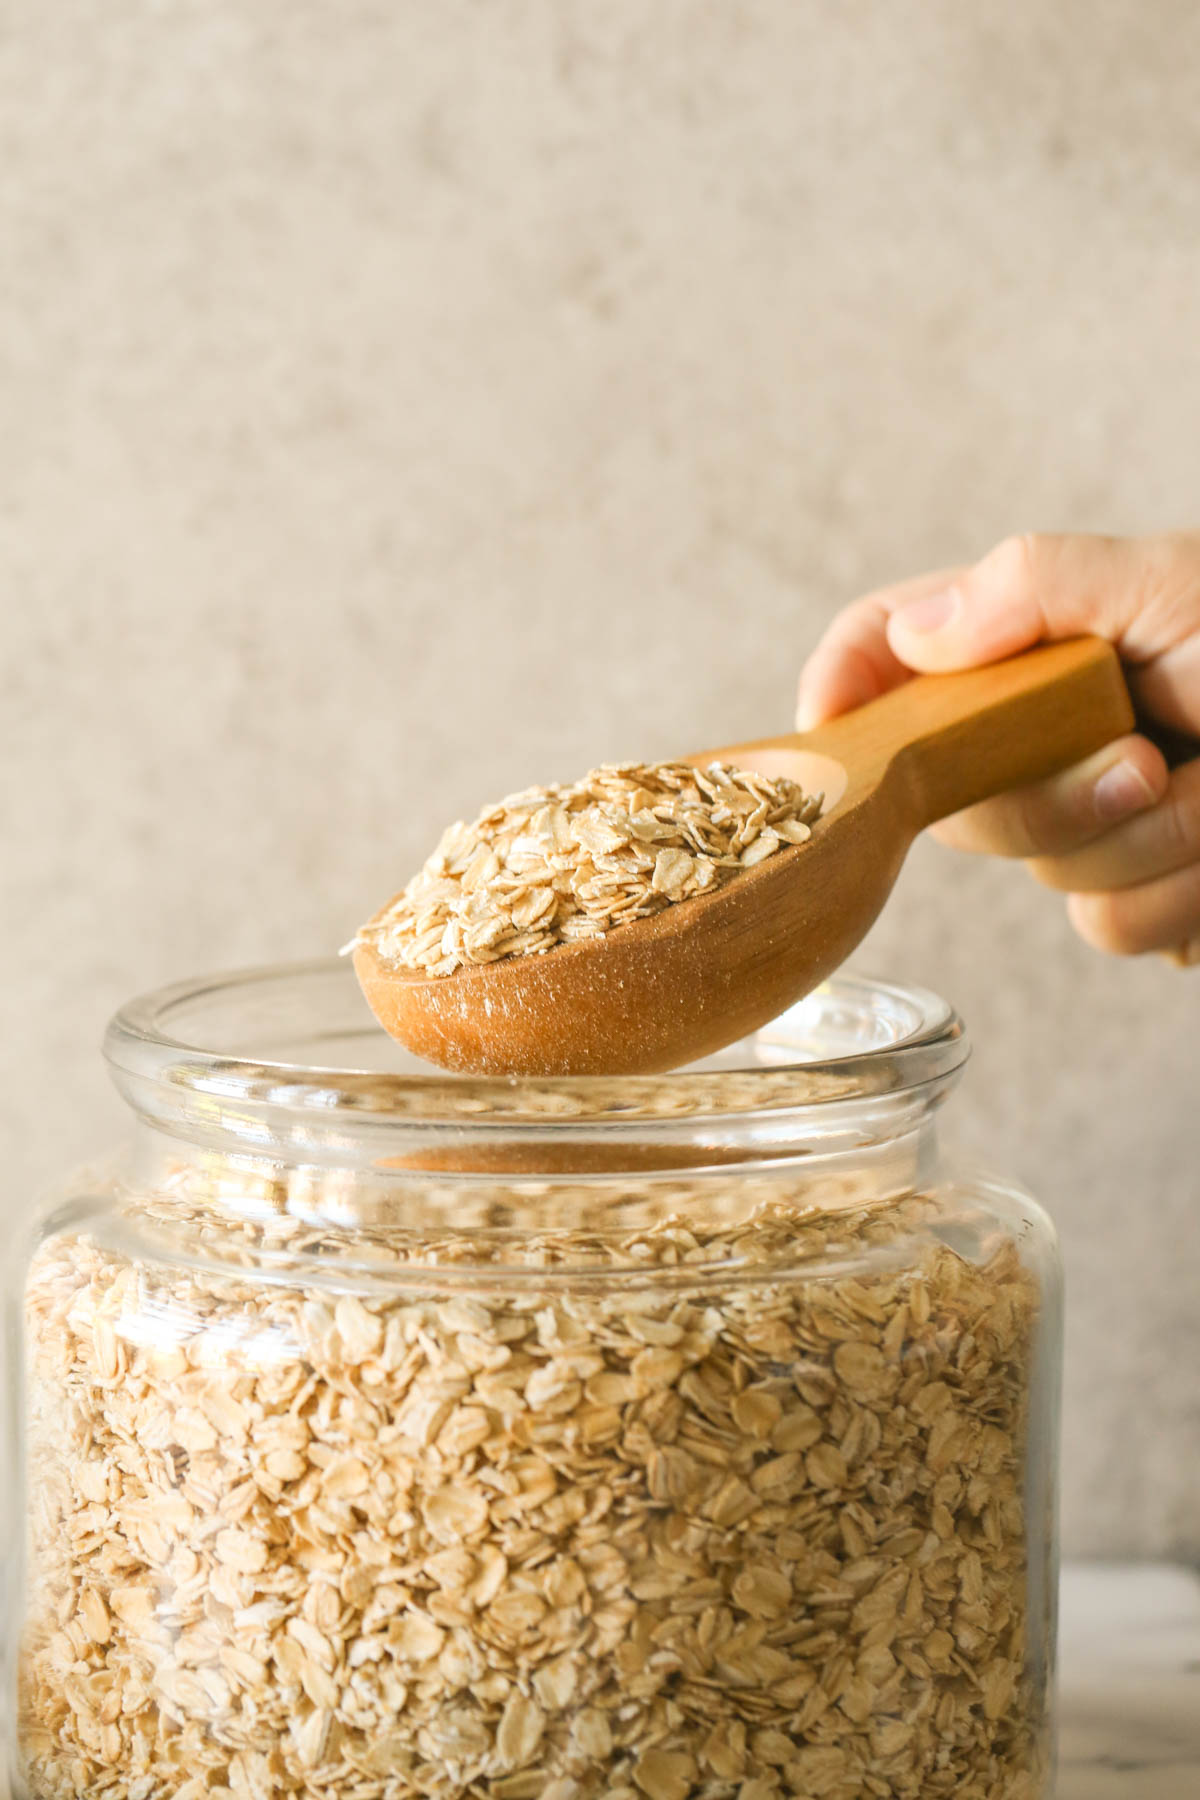 A large wooden scoop full of oats being held above a large glass jar of old fashioned oats.  